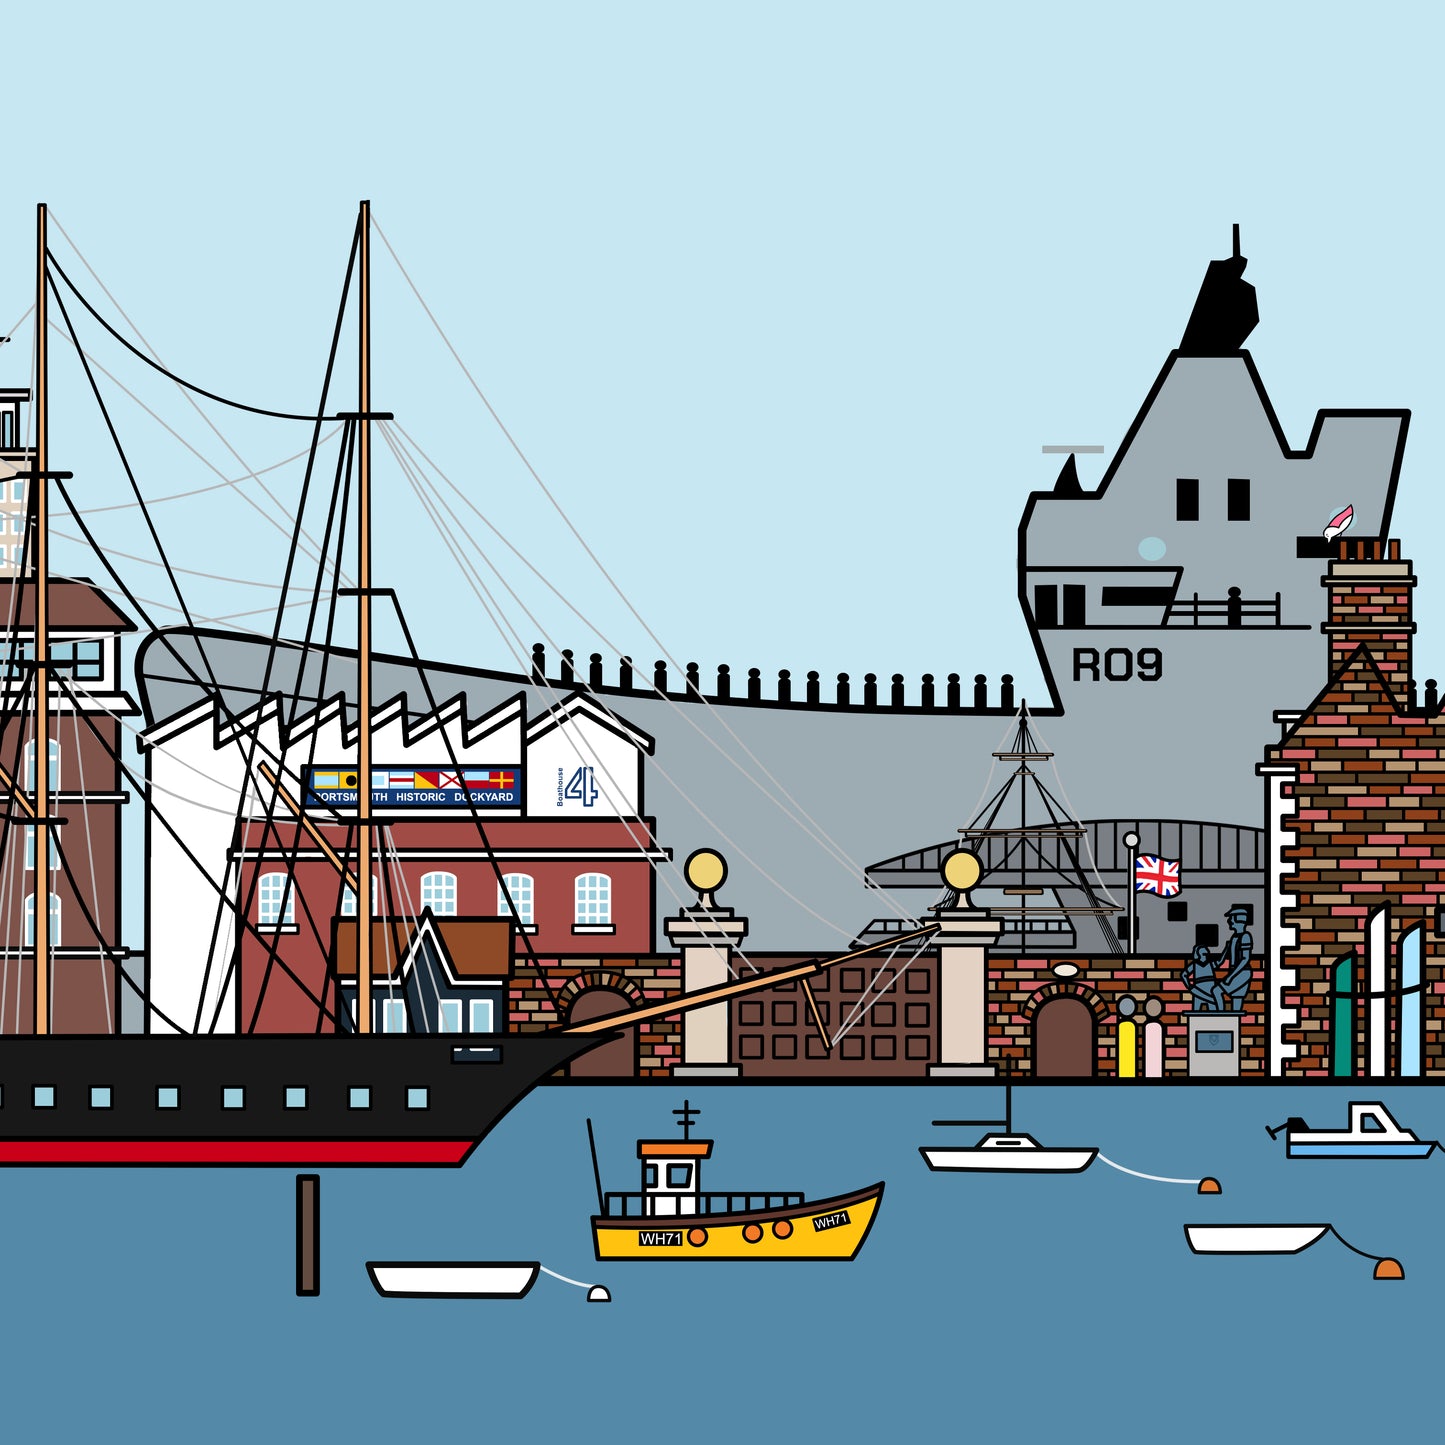 Detailed print of the dockyard main gate with boathouse 4 in the background. In front of the dockyard is the HMS victory with small fishing boats in the sea. In the far background is the Prince of Wales ship with a pale blue sky. There is also other small details of a british flag, sculpture, bollards and brickwork.